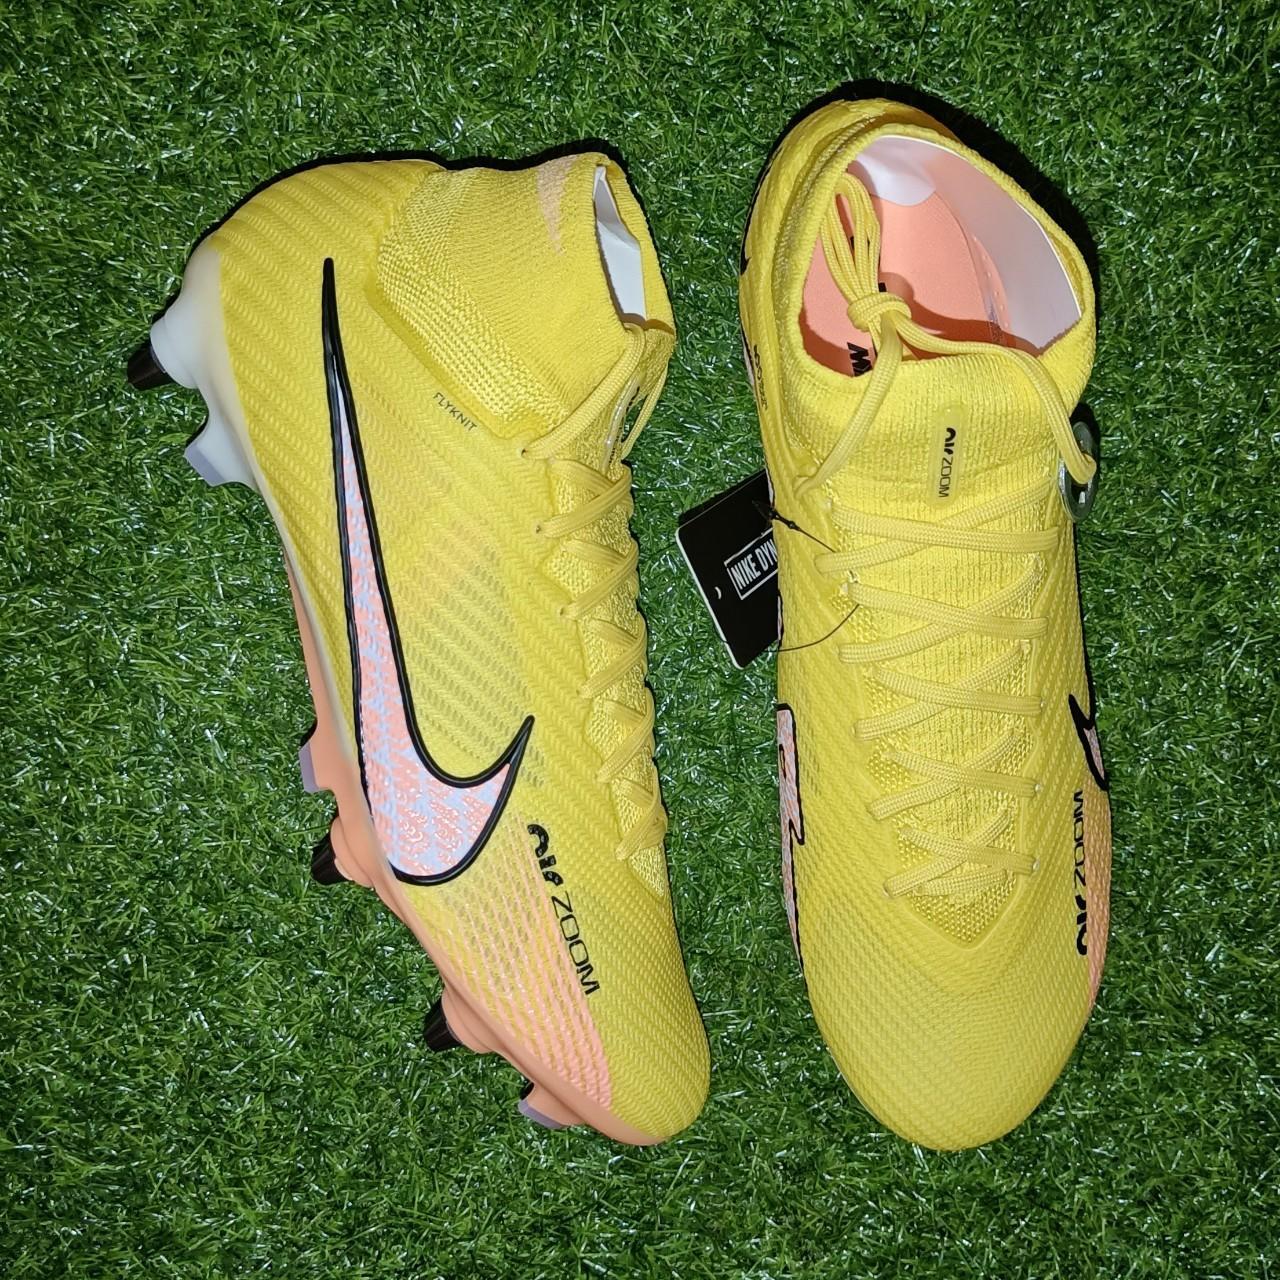 Nike Men's Yellow and Pink Boots | Depop